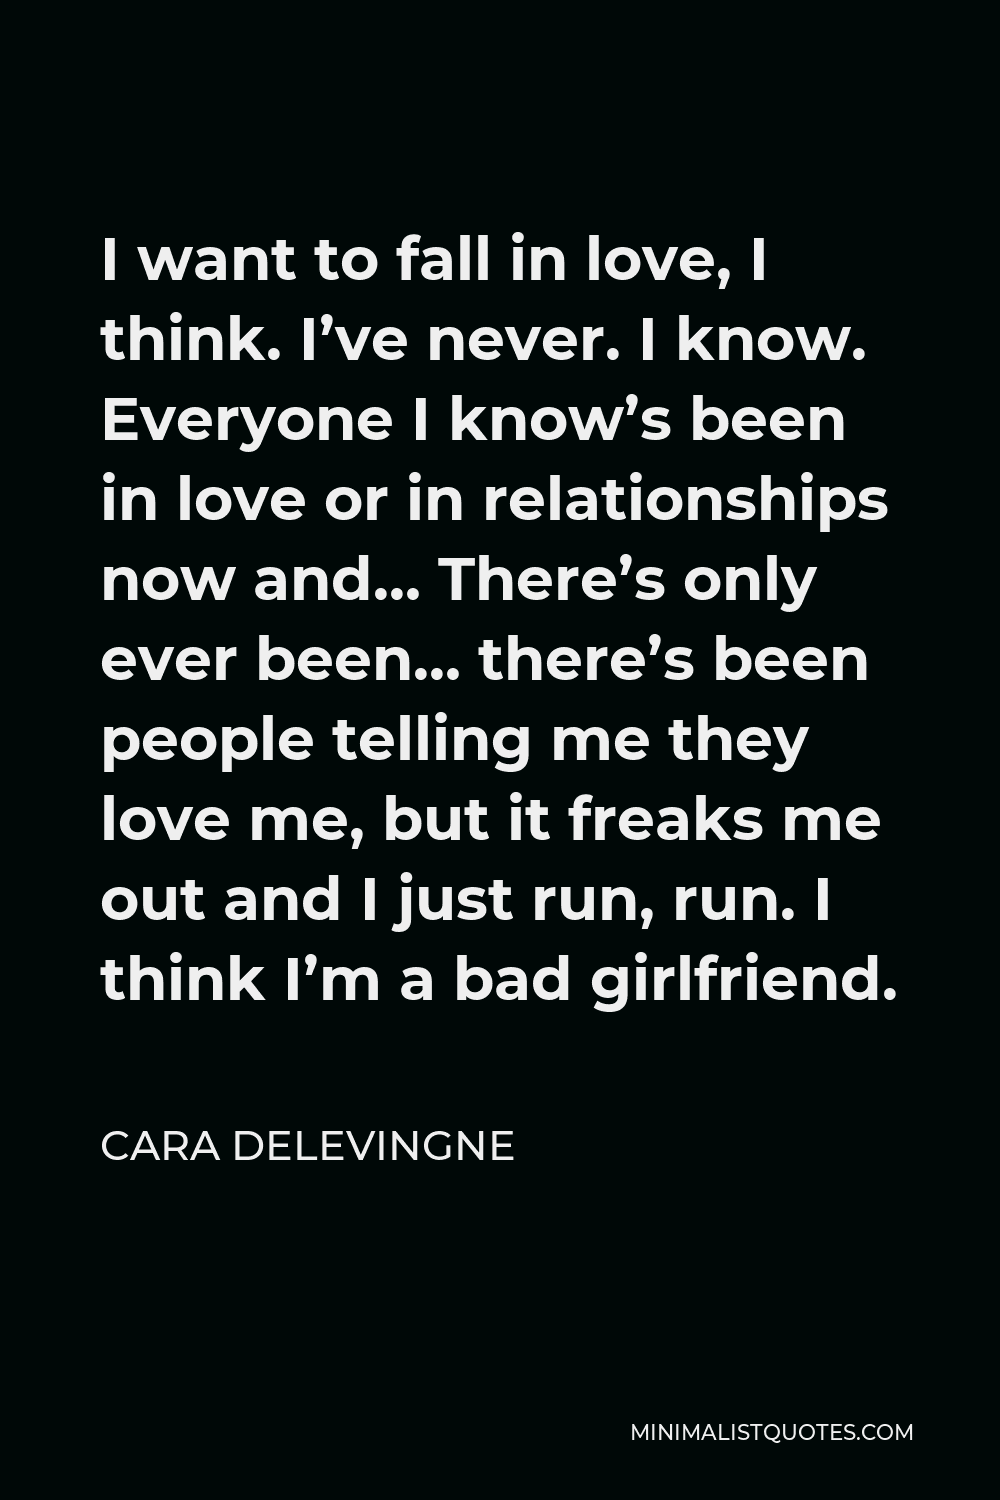 Cara Delevingne Quote - I want to fall in love, I think. I’ve never. I know. Everyone I know’s been in love or in relationships now and… There’s only ever been… there’s been people telling me they love me, but it freaks me out and I just run, run. I think I’m a bad girlfriend.